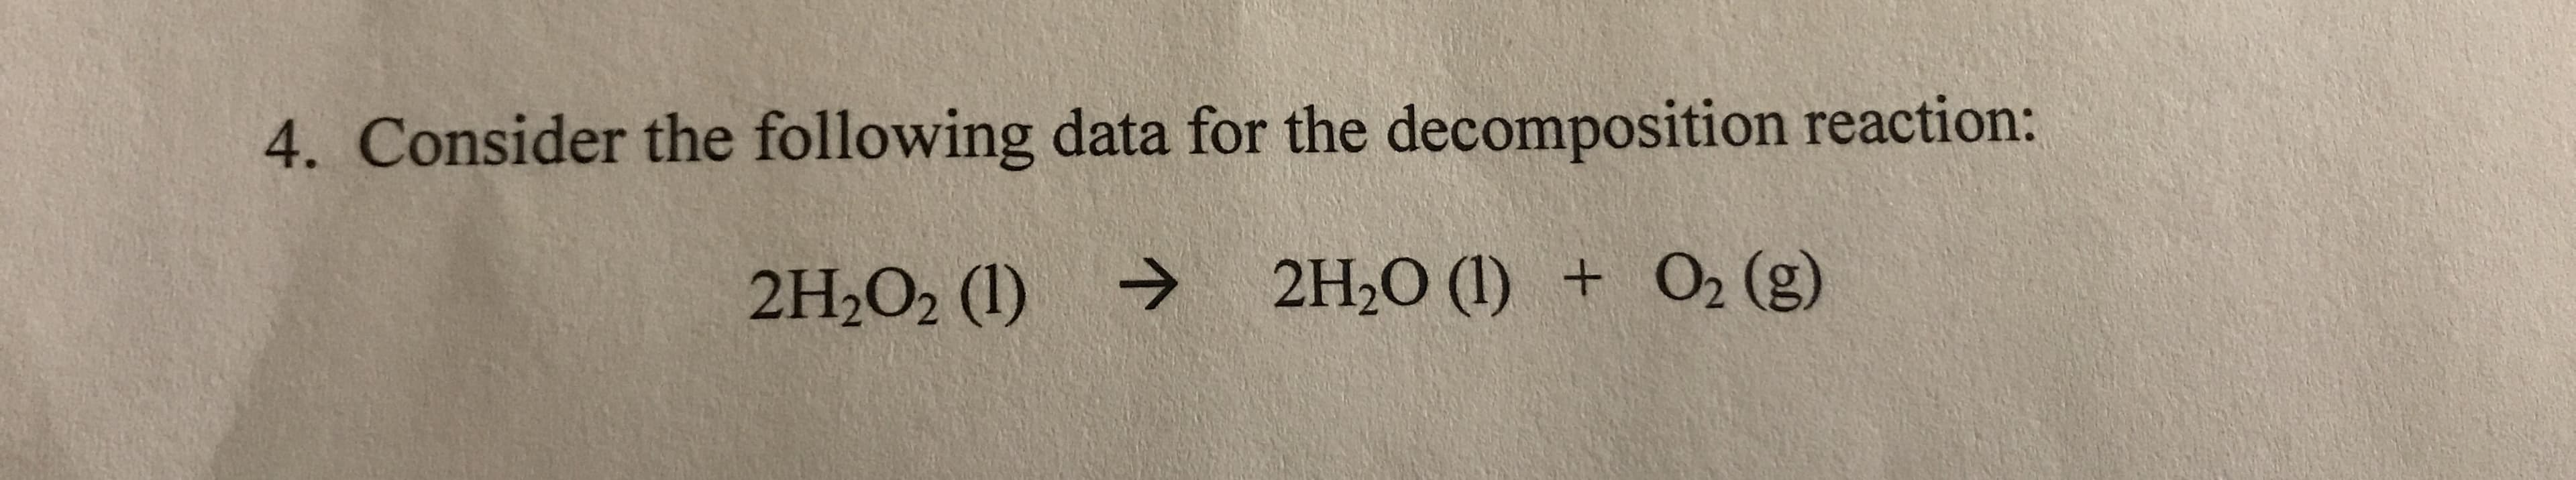 4. Consider the following data for the decomposition reaction:
2H-0 (1) + О2 (g)
2H2O2 (1)
